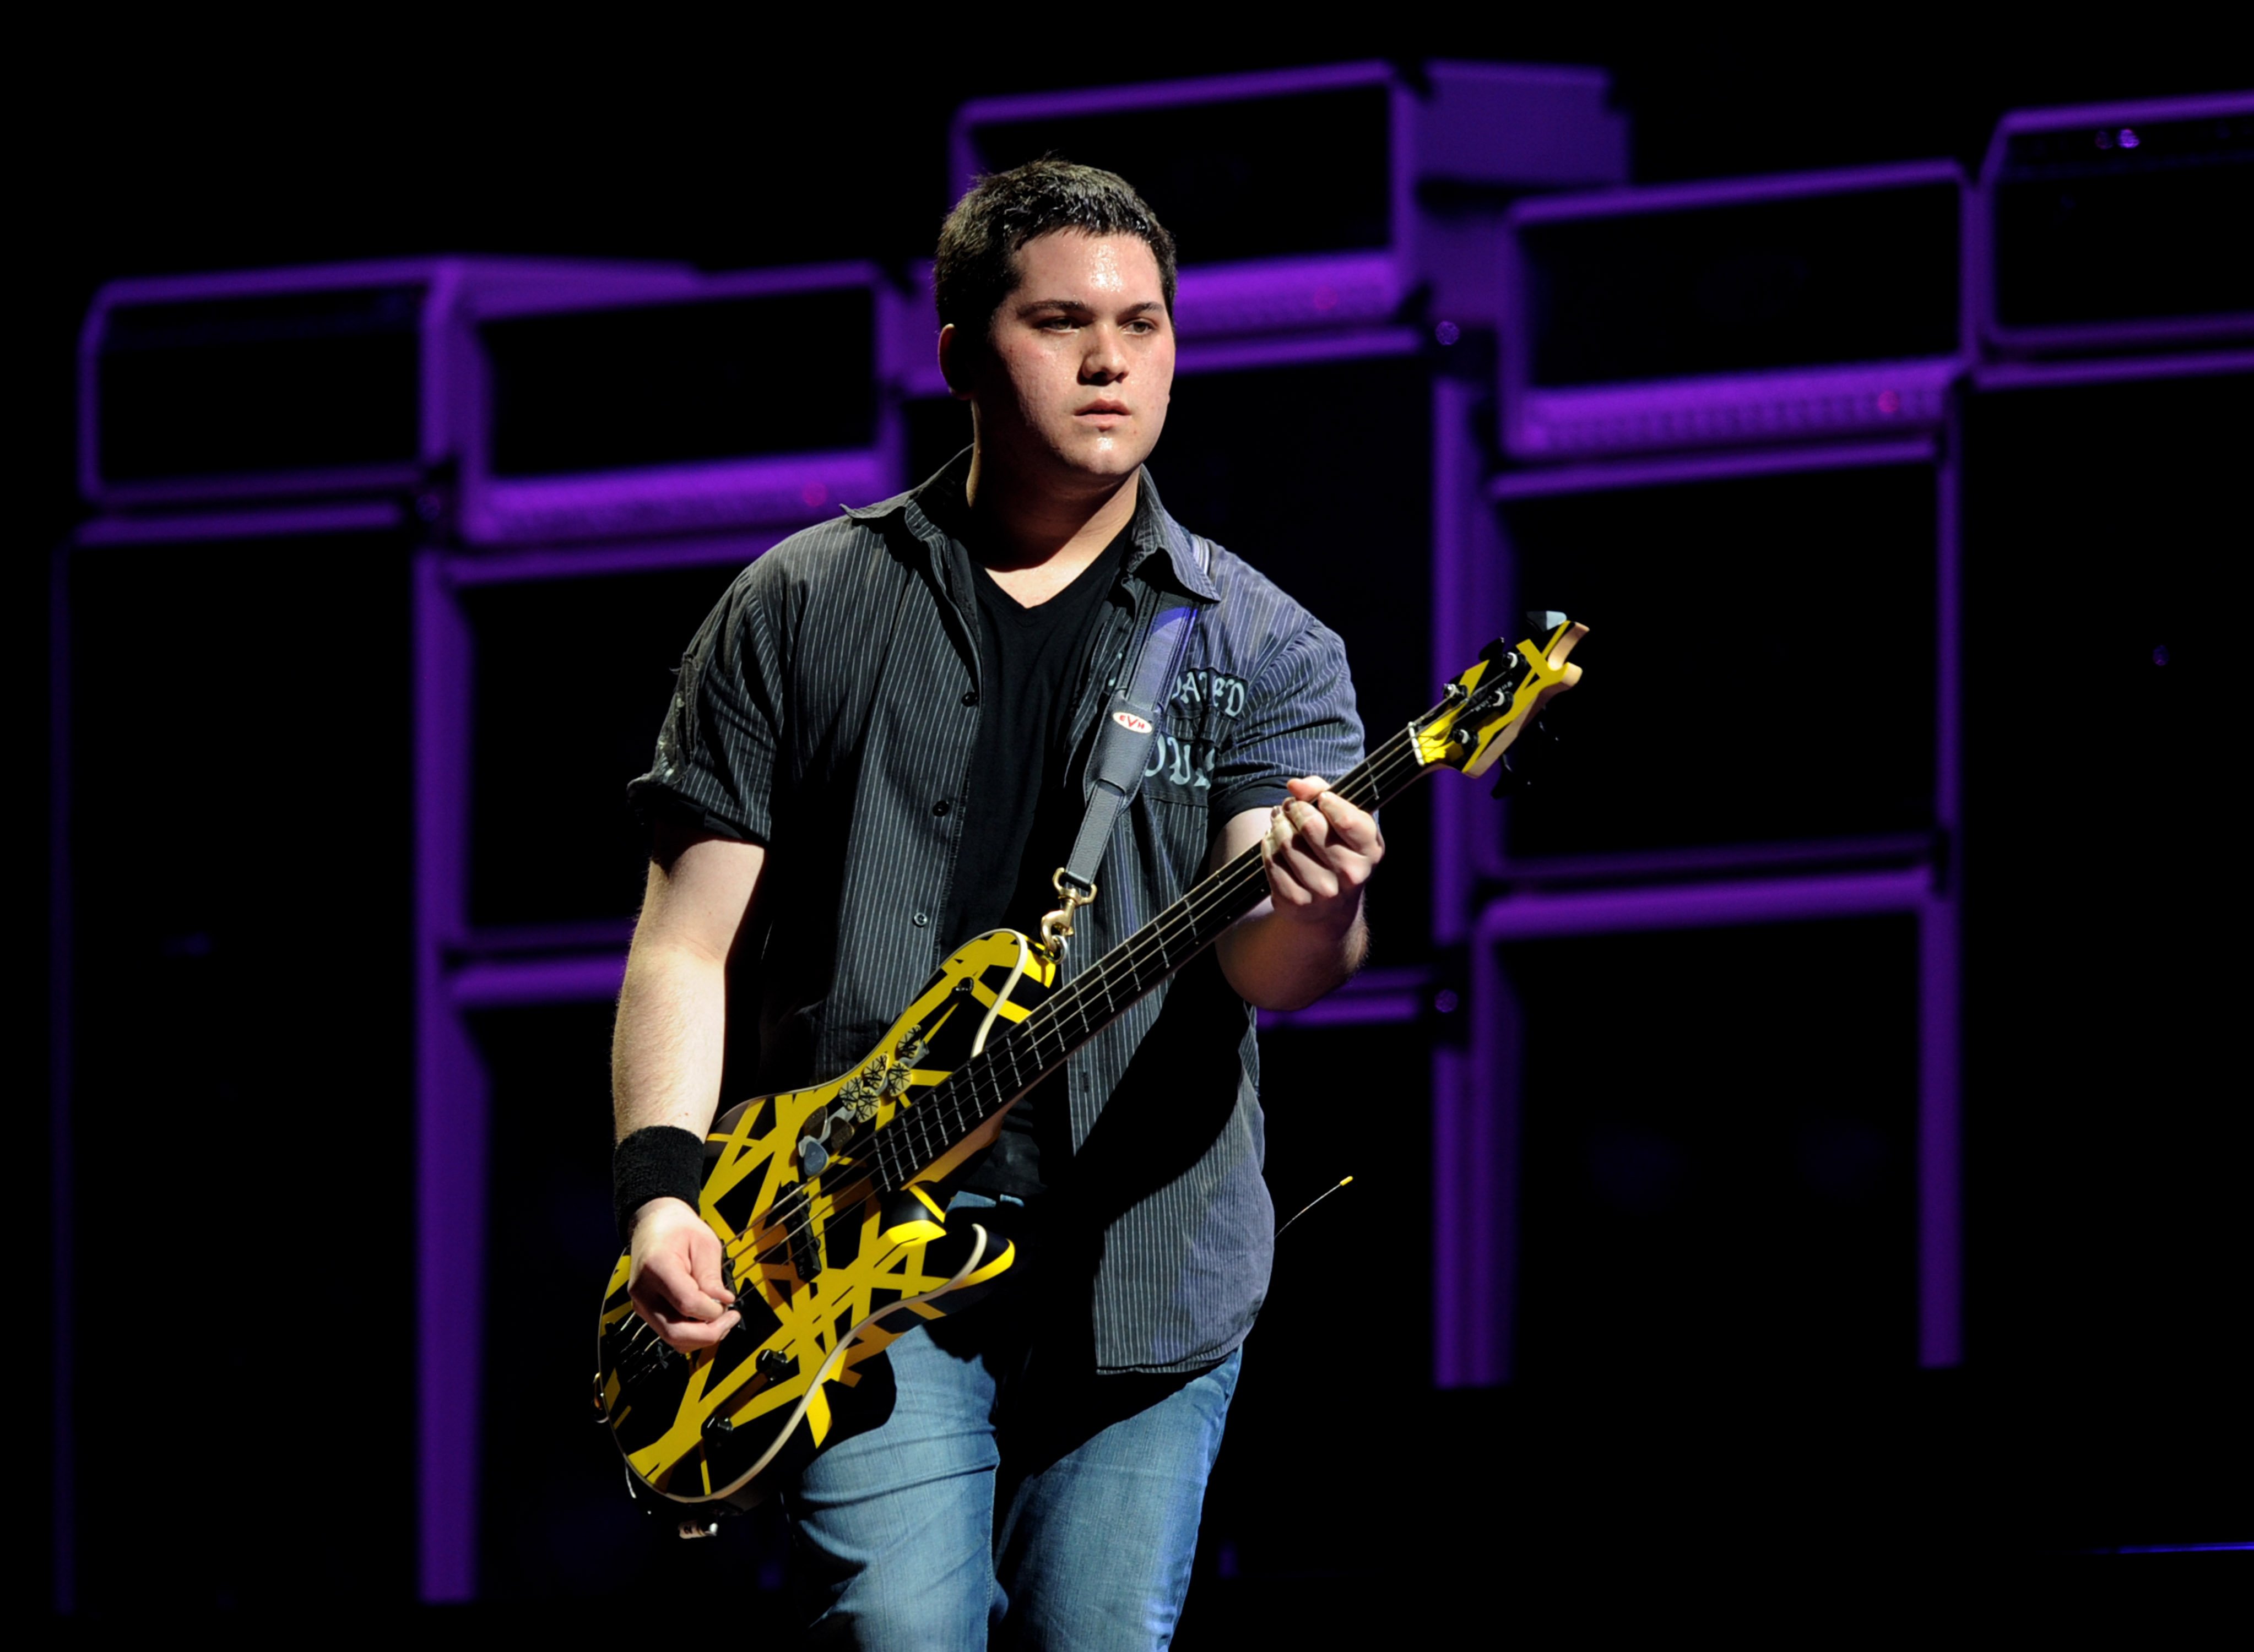 Wolfgang Van Halen of Van Halen performs at their dress rehearsal for family and friends at the Forum on February 8, 2012, in Inglewood, California. | Source: Getty Images